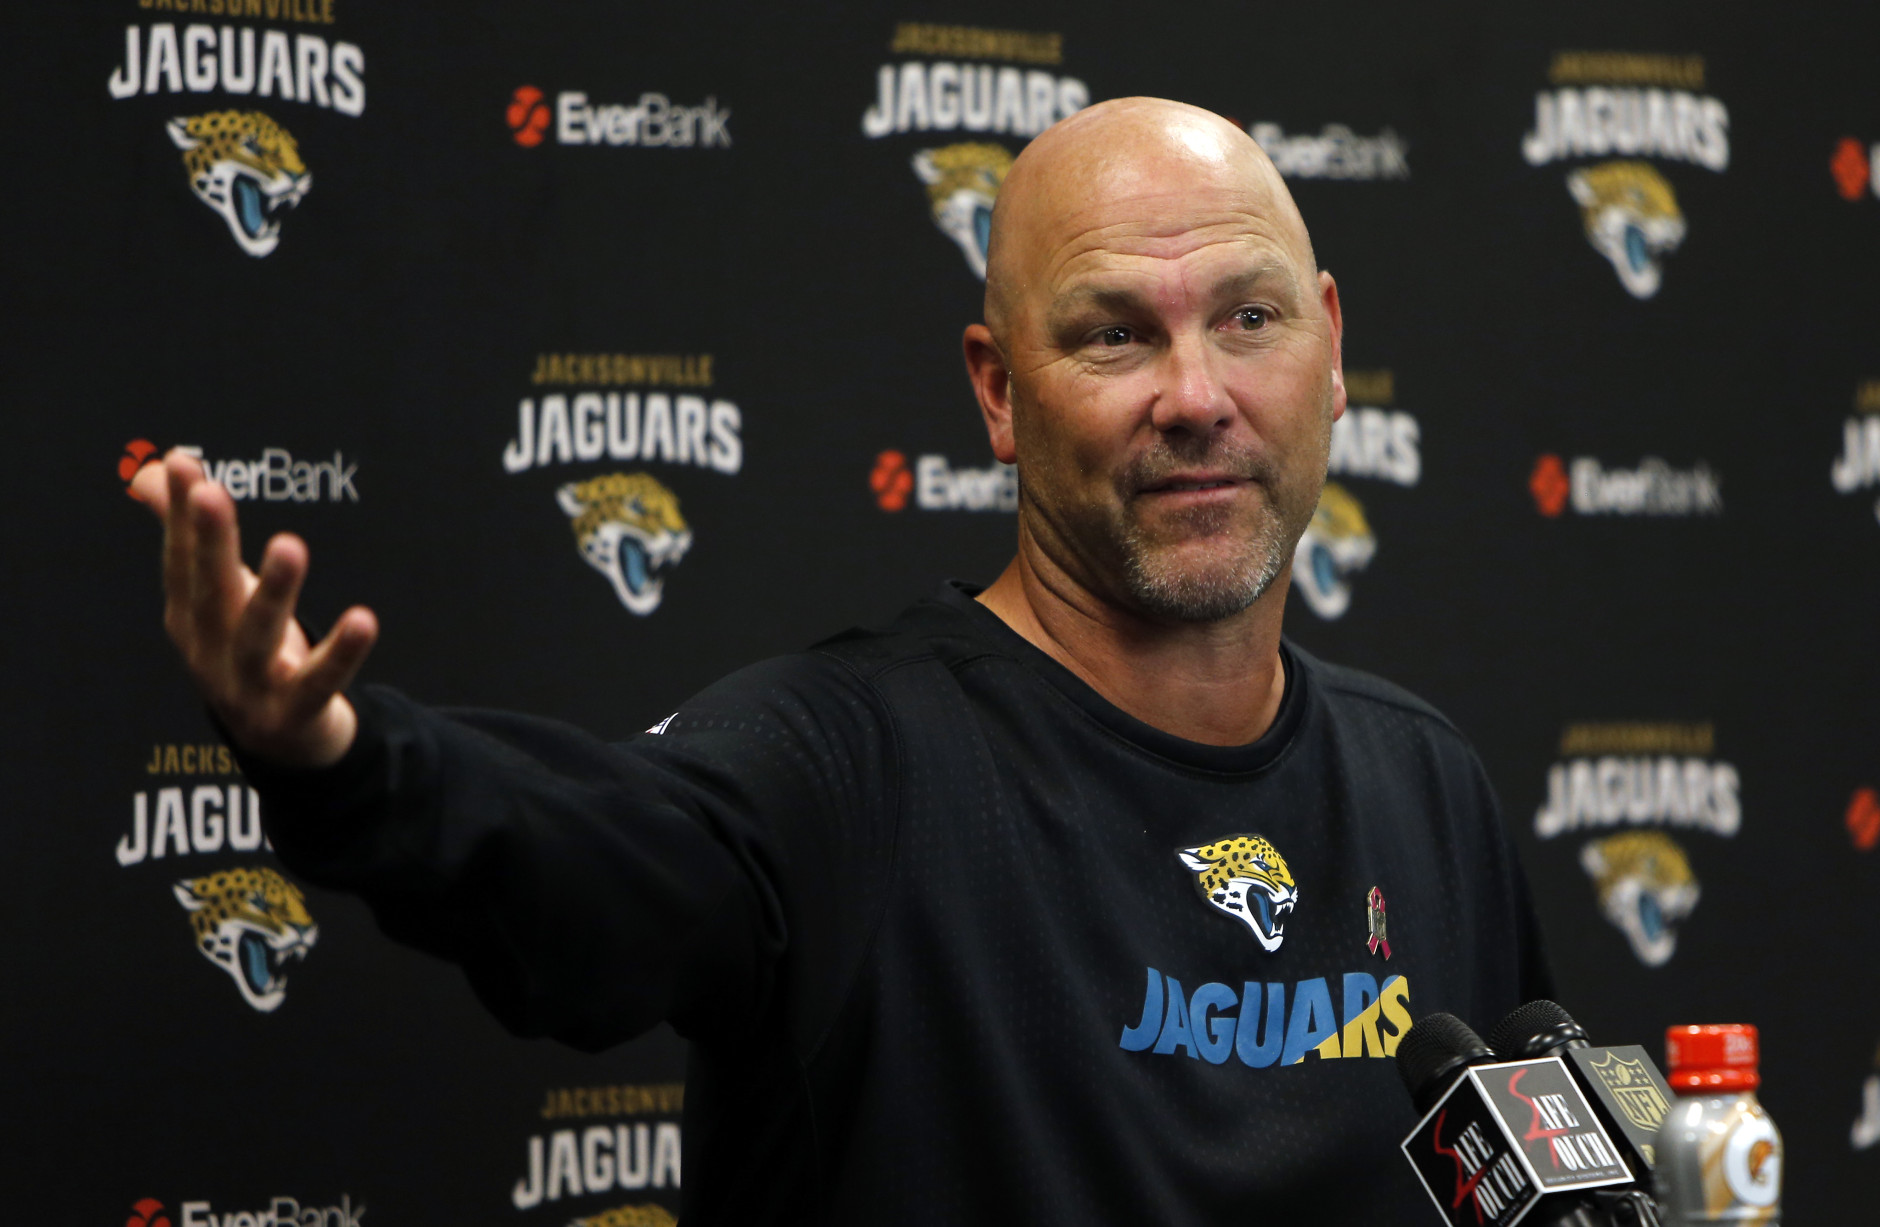 Jacksonville Jaguars head coach Gus Bradley speaks to the media during post game press conference after the second half of an NFL football game, Sunday, Oct. 18, 2015, in Jacksonville, Fla. The Texans beat the Jaguars 31-20. (AP Photo/Stephen B. Morton)